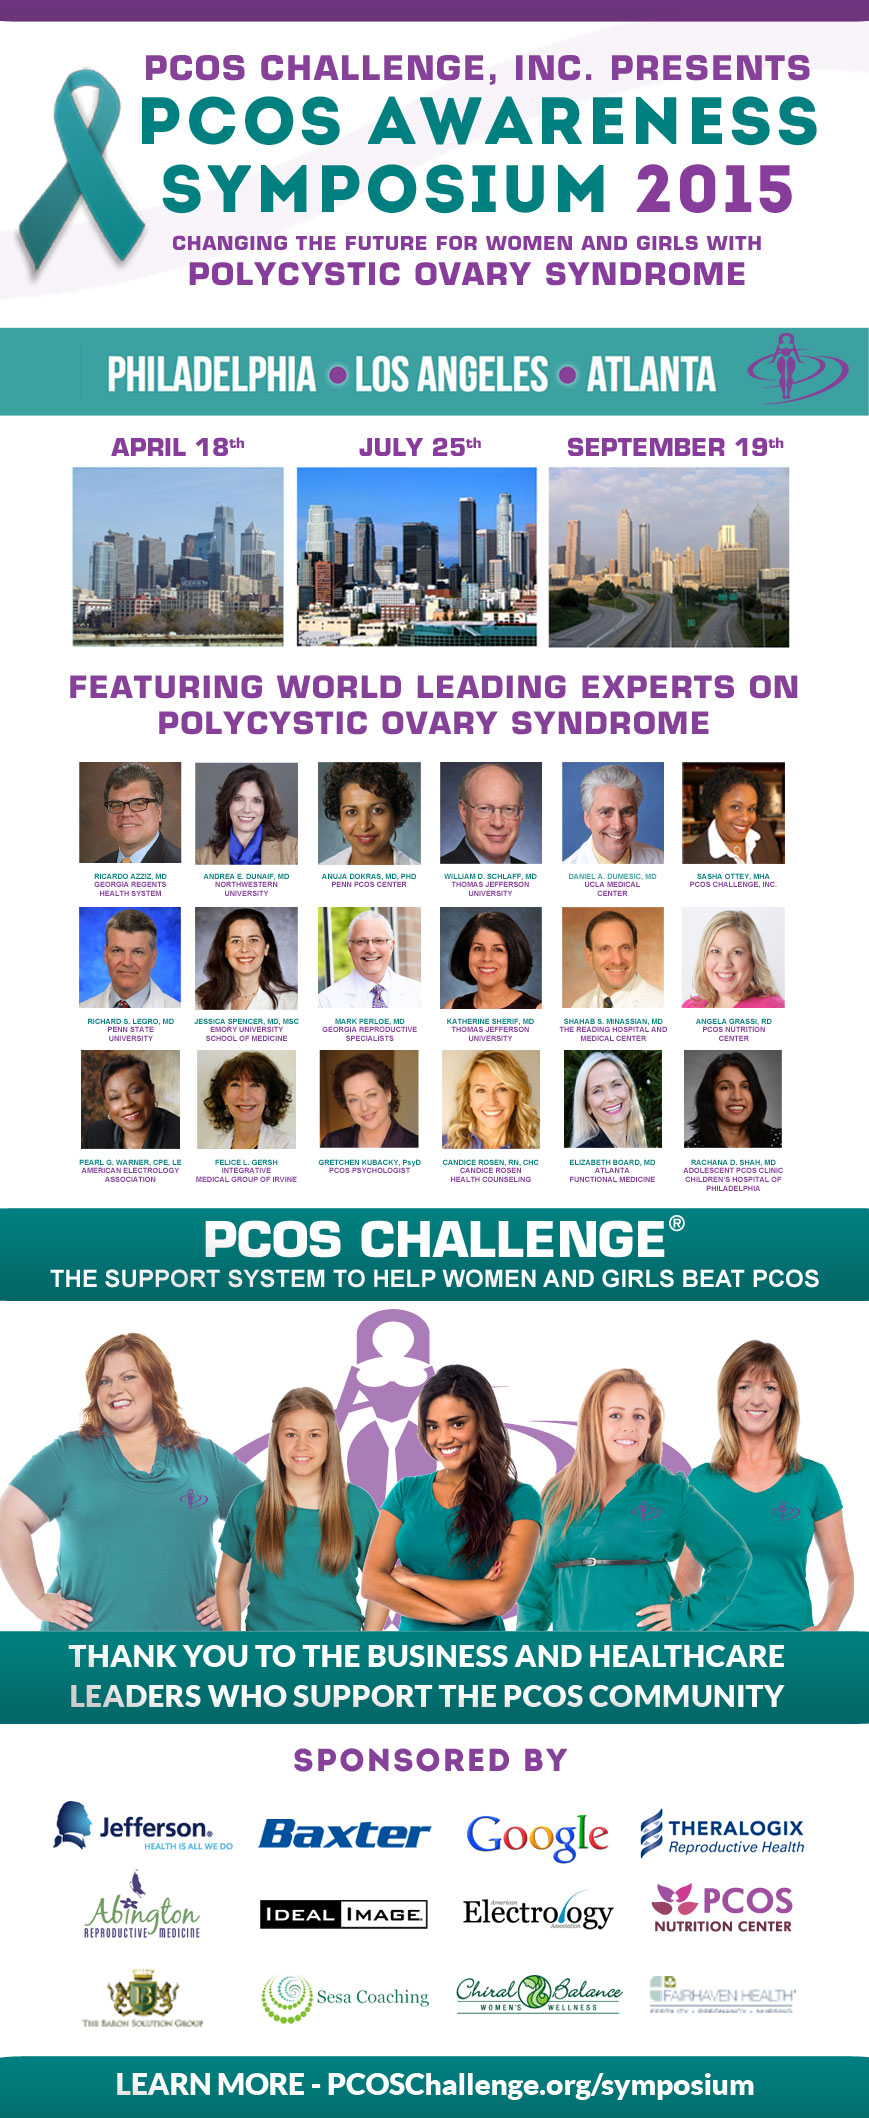 2015 PCOS Awareness Symposium - Presented by PCOS Challenge, Inc